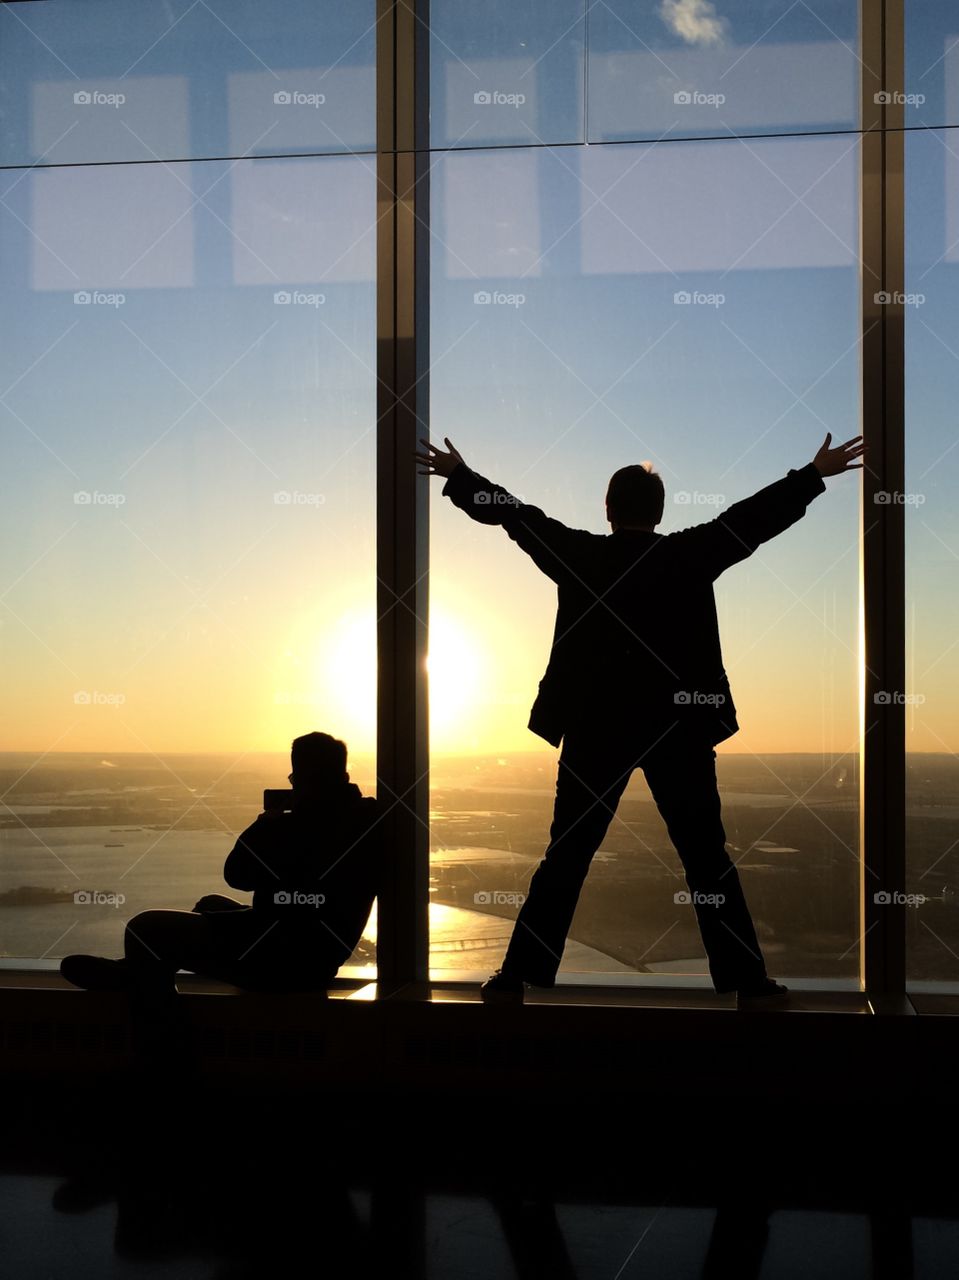 Two people watching the sun go down from the viewing gallery of a skyscraper. One person is taking a picture with their phone and one person is enjoying the moment